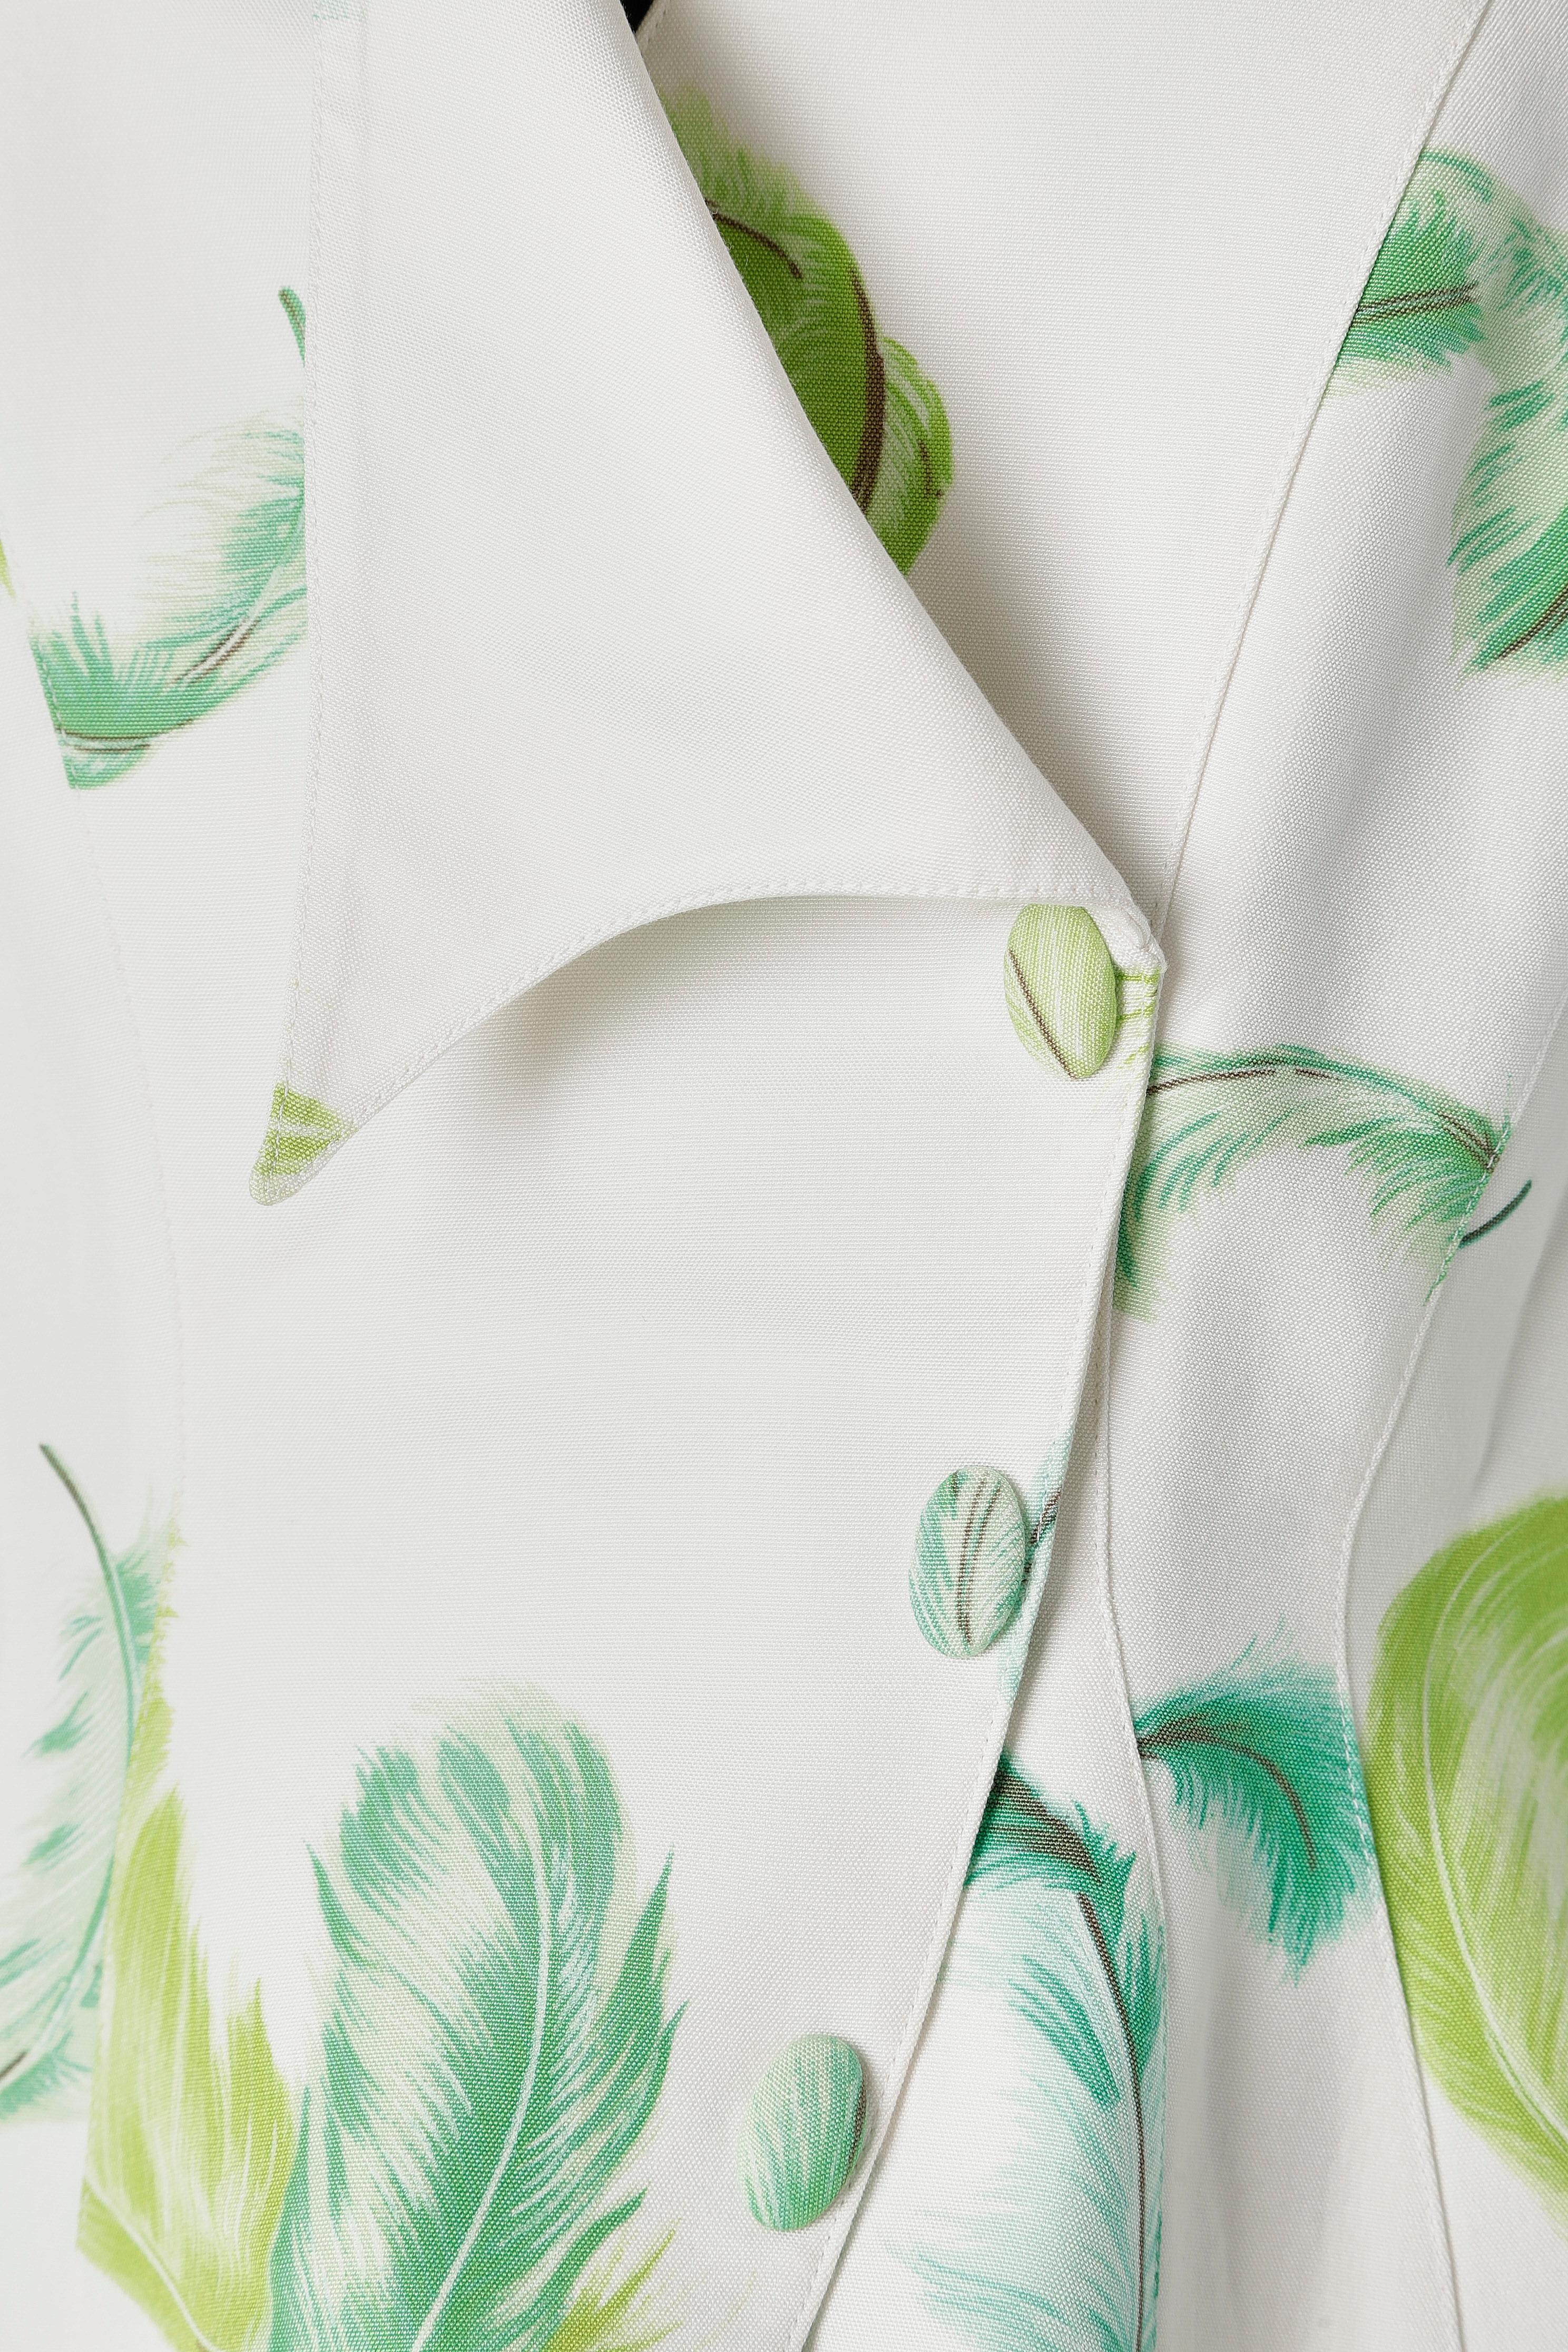 White skirt-suit with green feathers print .  Double-breasted's jacket with thin shoulder-pad and snap covered with fabric. Cut-work.
Fabric composition: 95% rayon, 5% silk.
SIZE 38 (Fr) 8 or M (Us) The skirt fit more like S (waist= 62 cm)